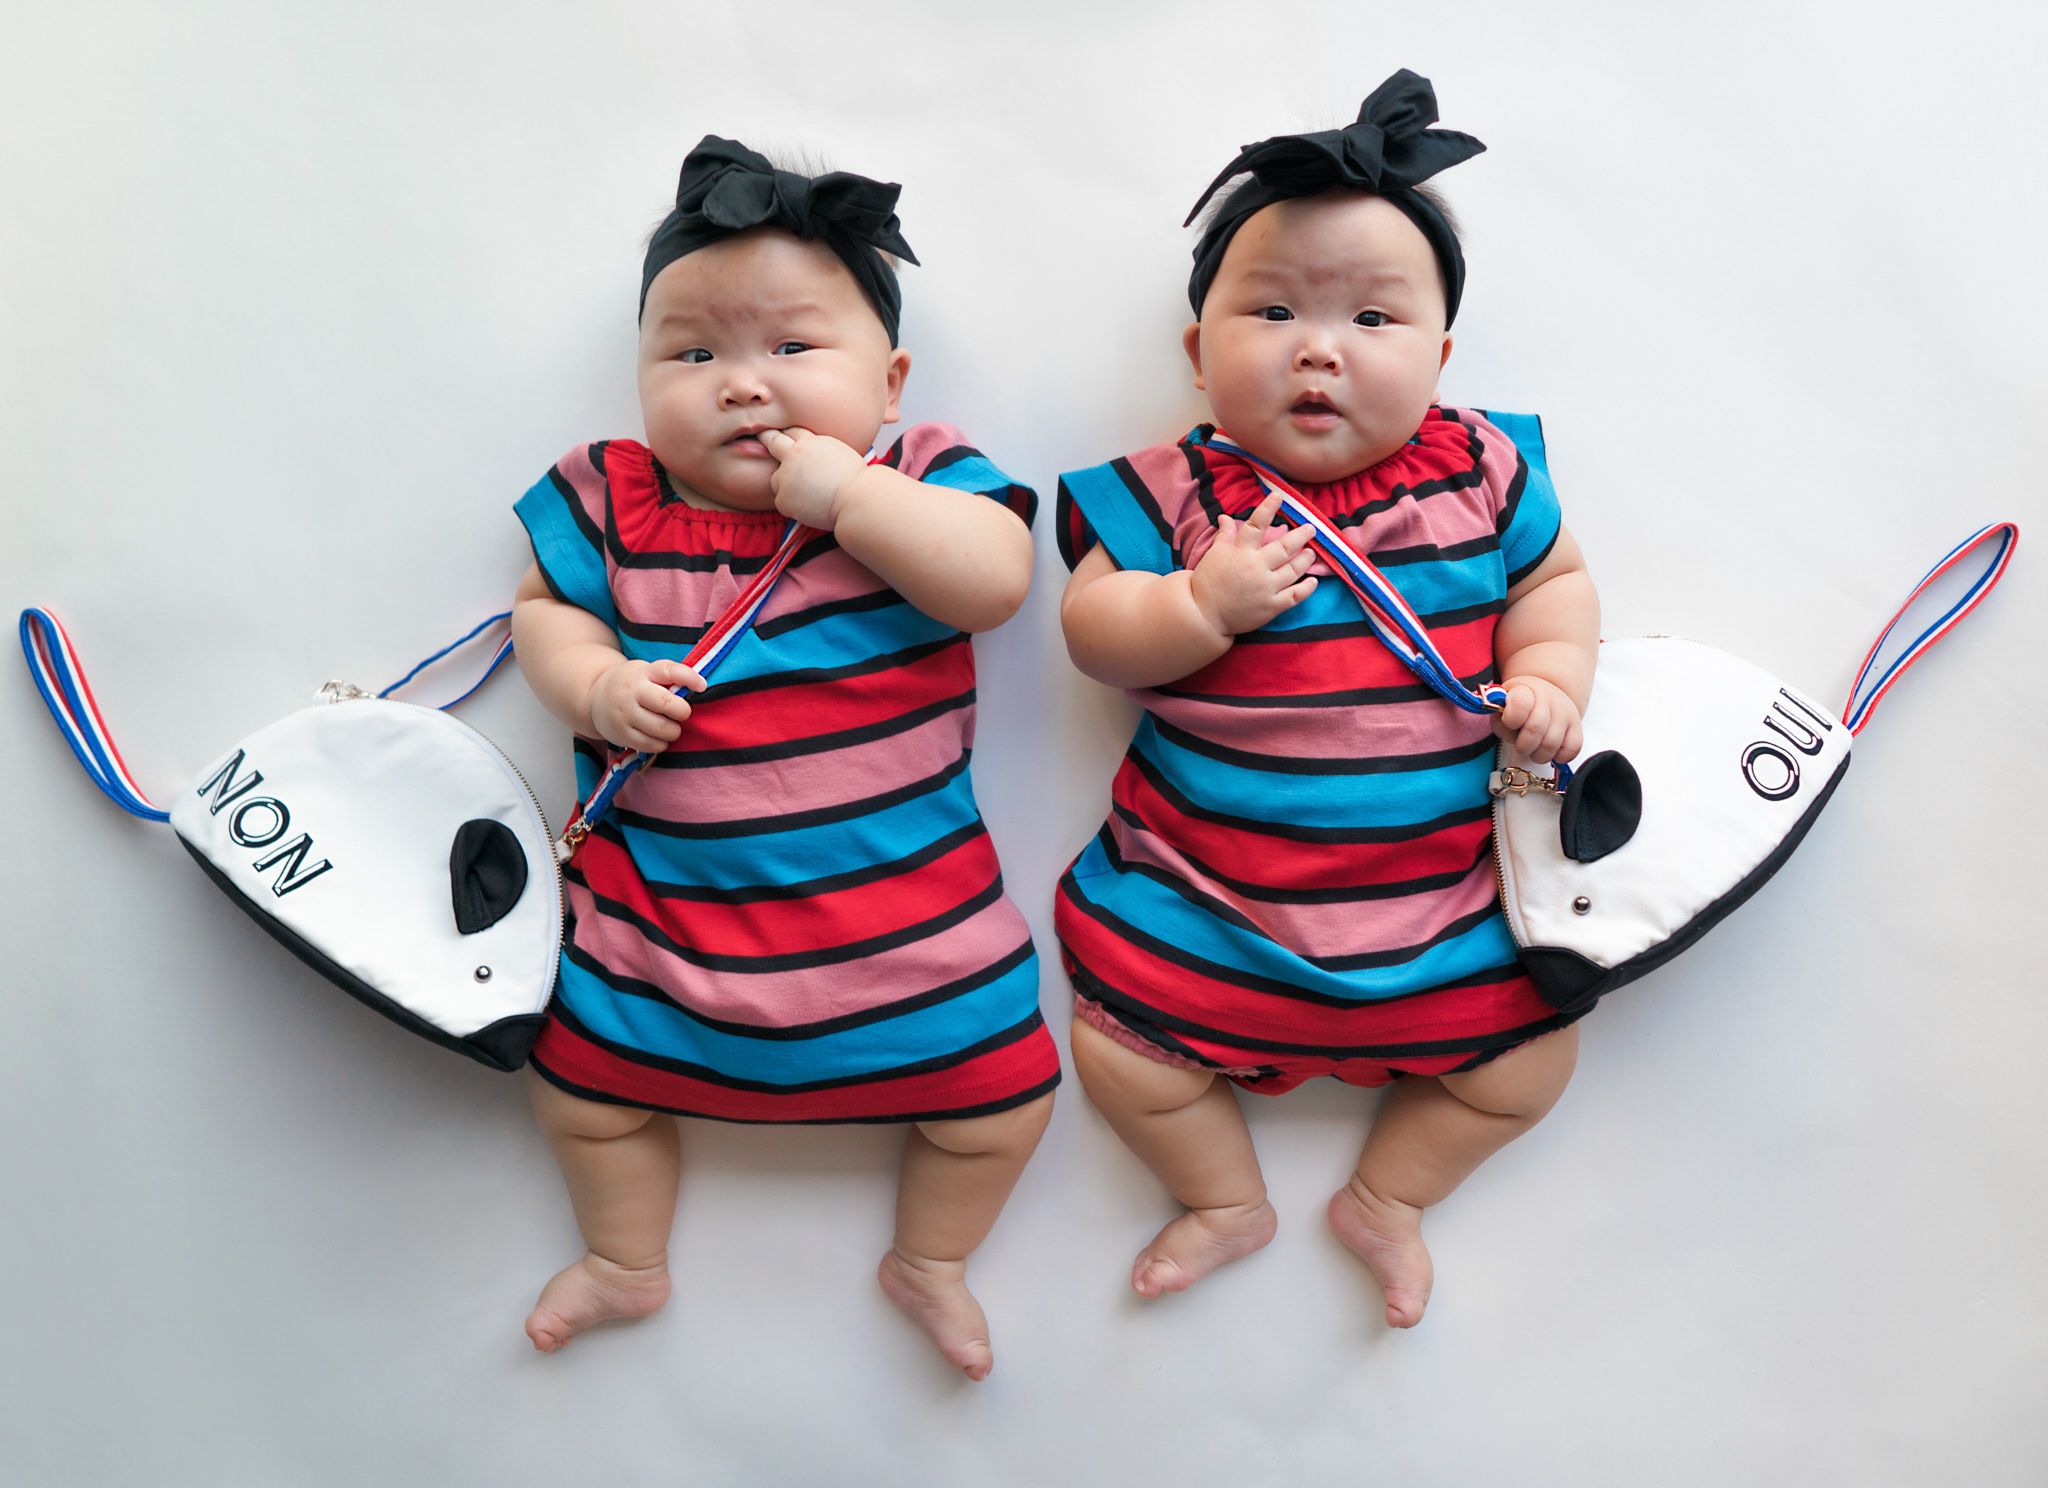 The cutest twins on the block, Singapore  - Apr 2016